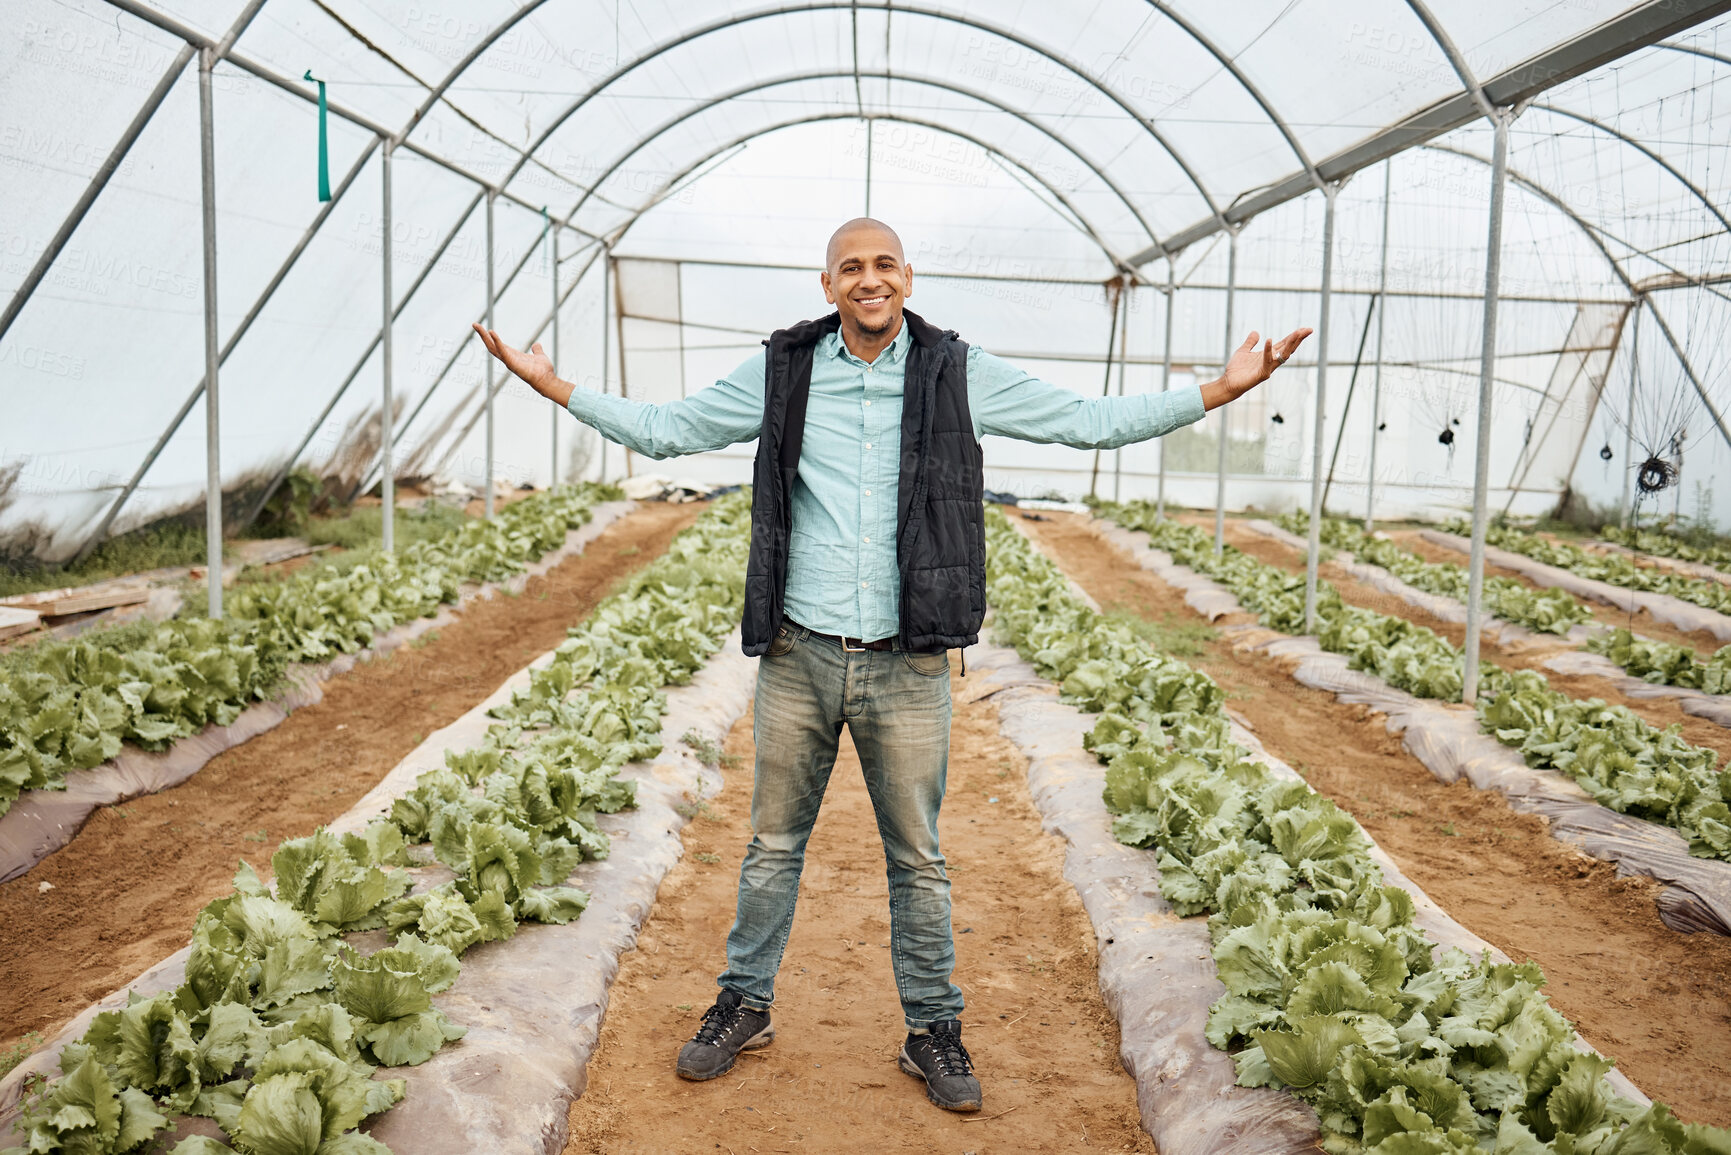 Buy stock photo Farmer, portrait or arms up in farming success, greenhouse vegetable harvest or agriculture land growth in sustainability field. Smile, happy or winner farming man and pride hands for lettuce victory